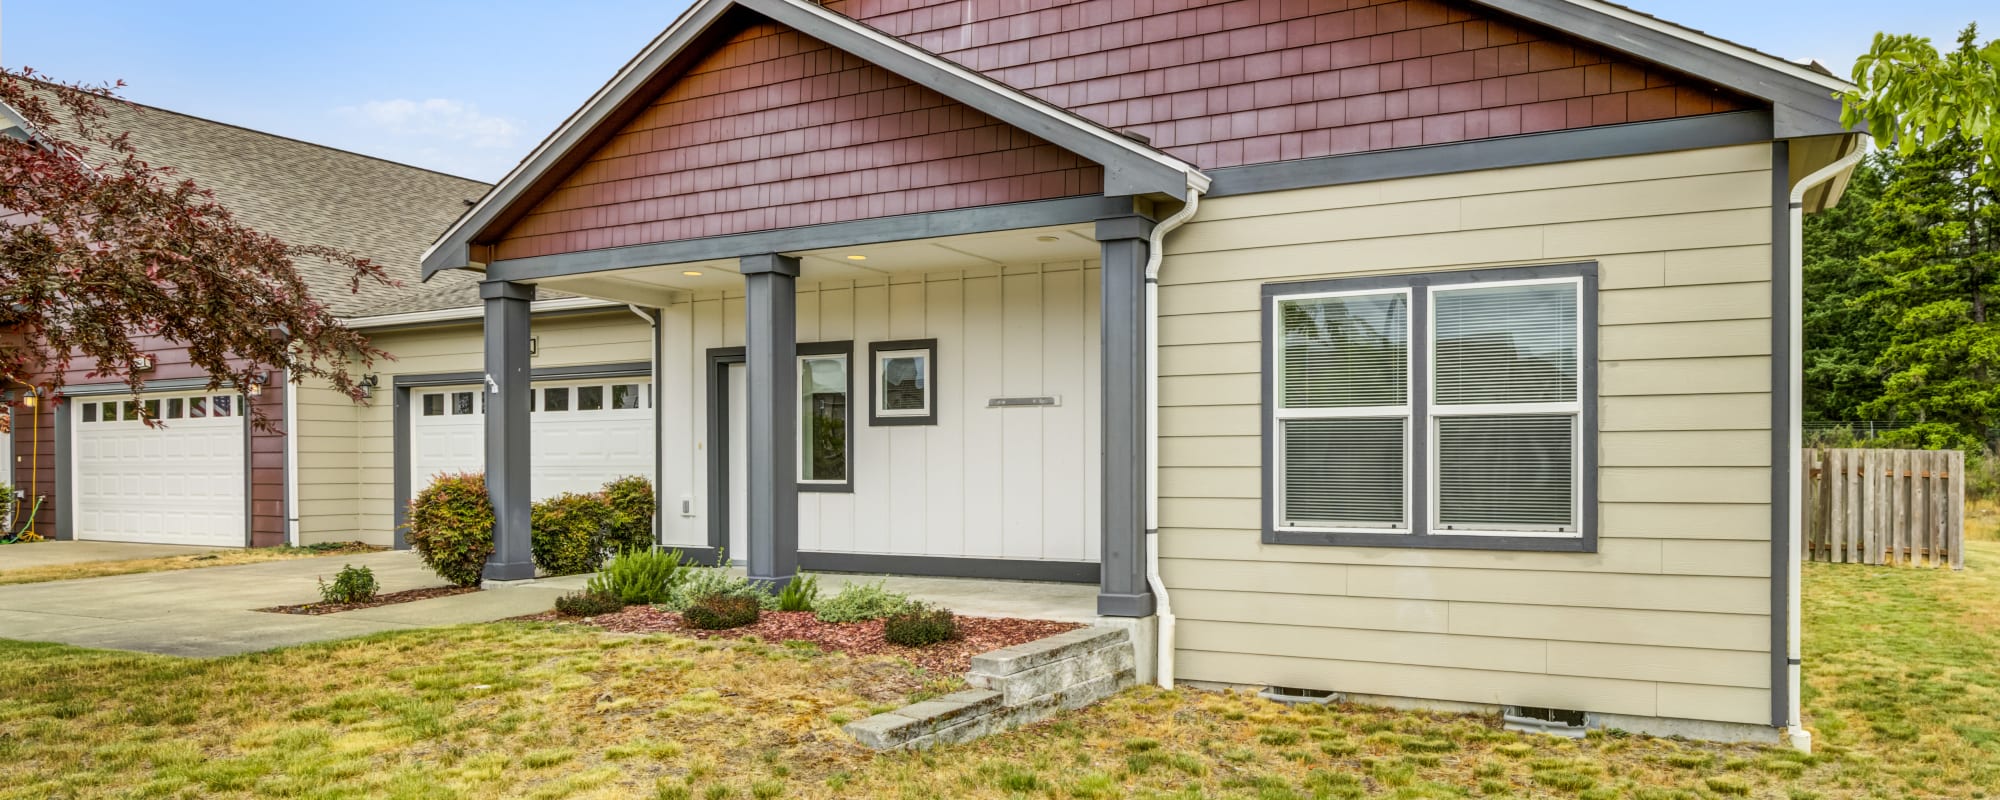 Exterior of duplex home at Meriwether Landing in Joint Base Lewis McChord, Washington